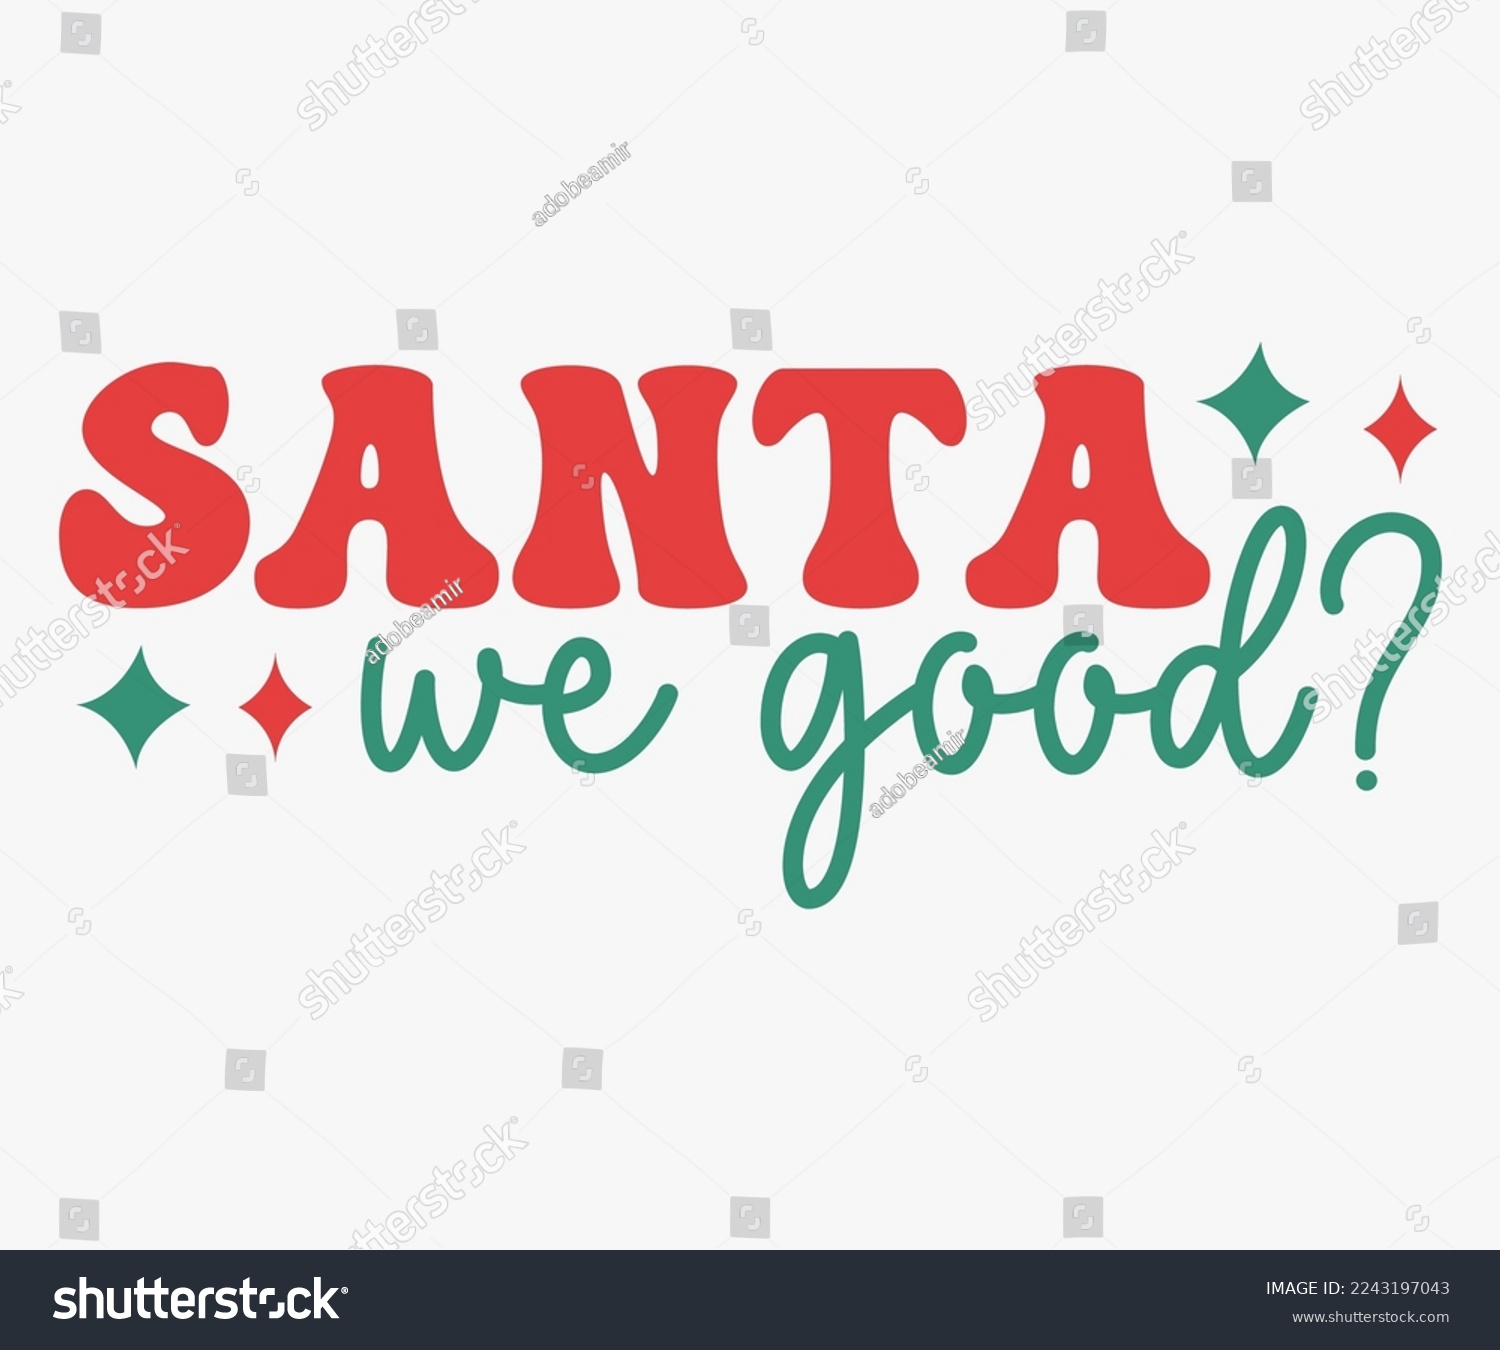 SVG of Santa We Good Christmas Saying SVG, Retro Christmas T-shirt, Funny Christmas Quotes, Merry Christmas Saying SVG, Holiday Saying SVG, New Year Quotes, Winter Quotes SVG, Cut File for Cricut, Silhouette svg